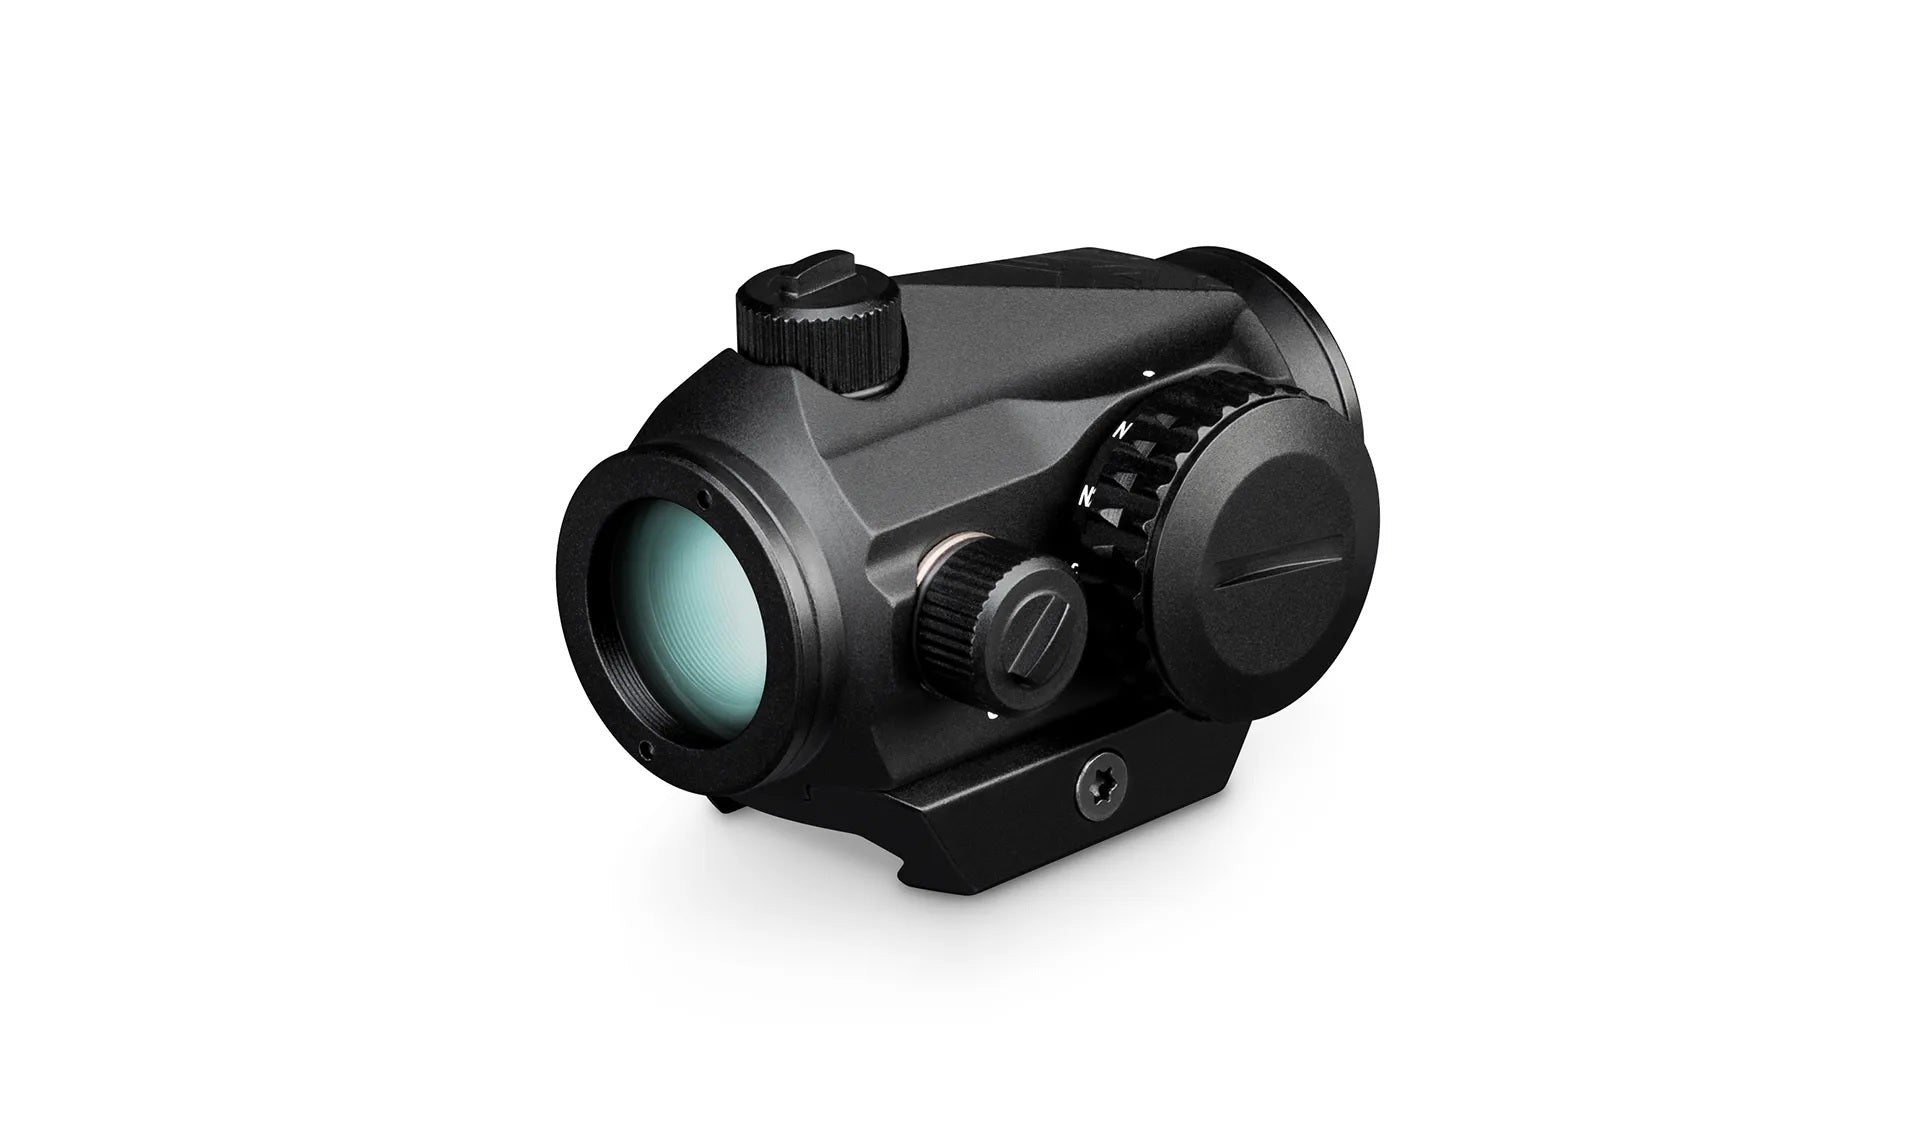 Vortex Crossfire Red Dot, 2 MOA Dot Reticle, CF-RD2